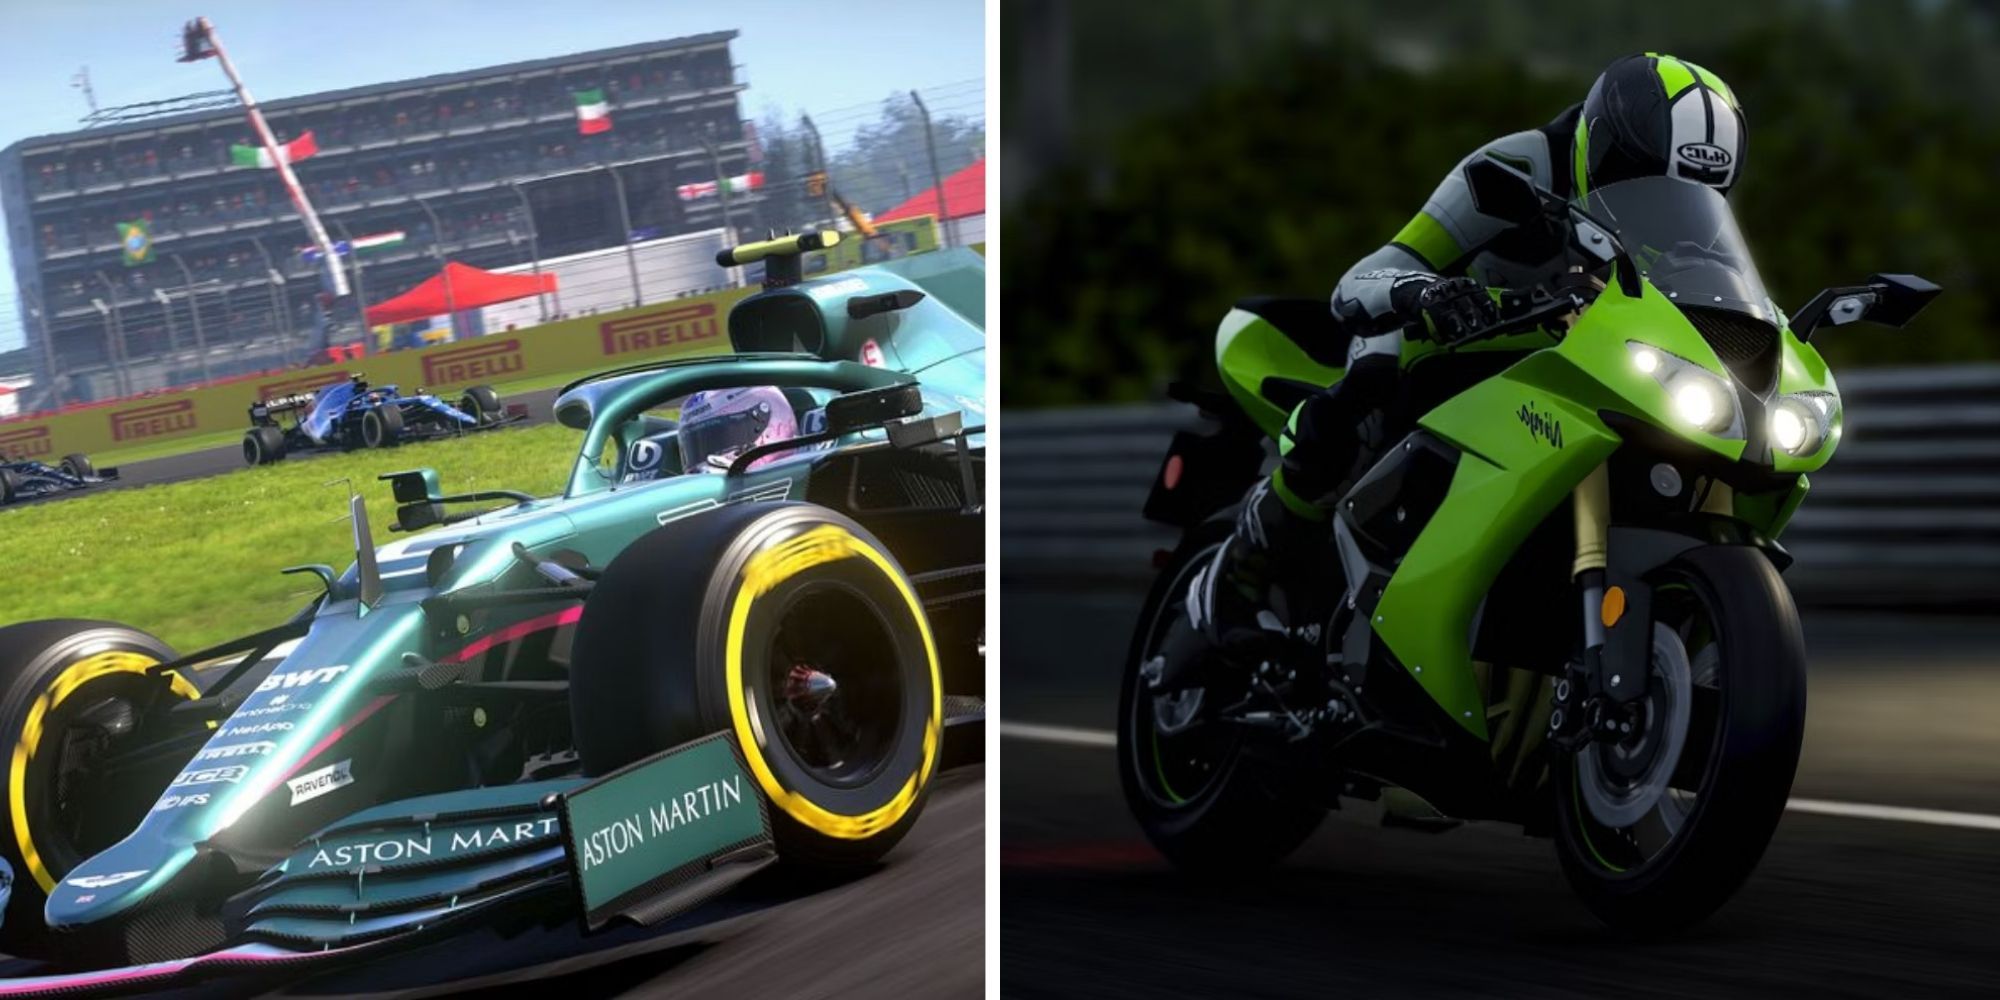 The Best Racing Games On Xbox Series X|S Featuring F1 21 and RIDE 4